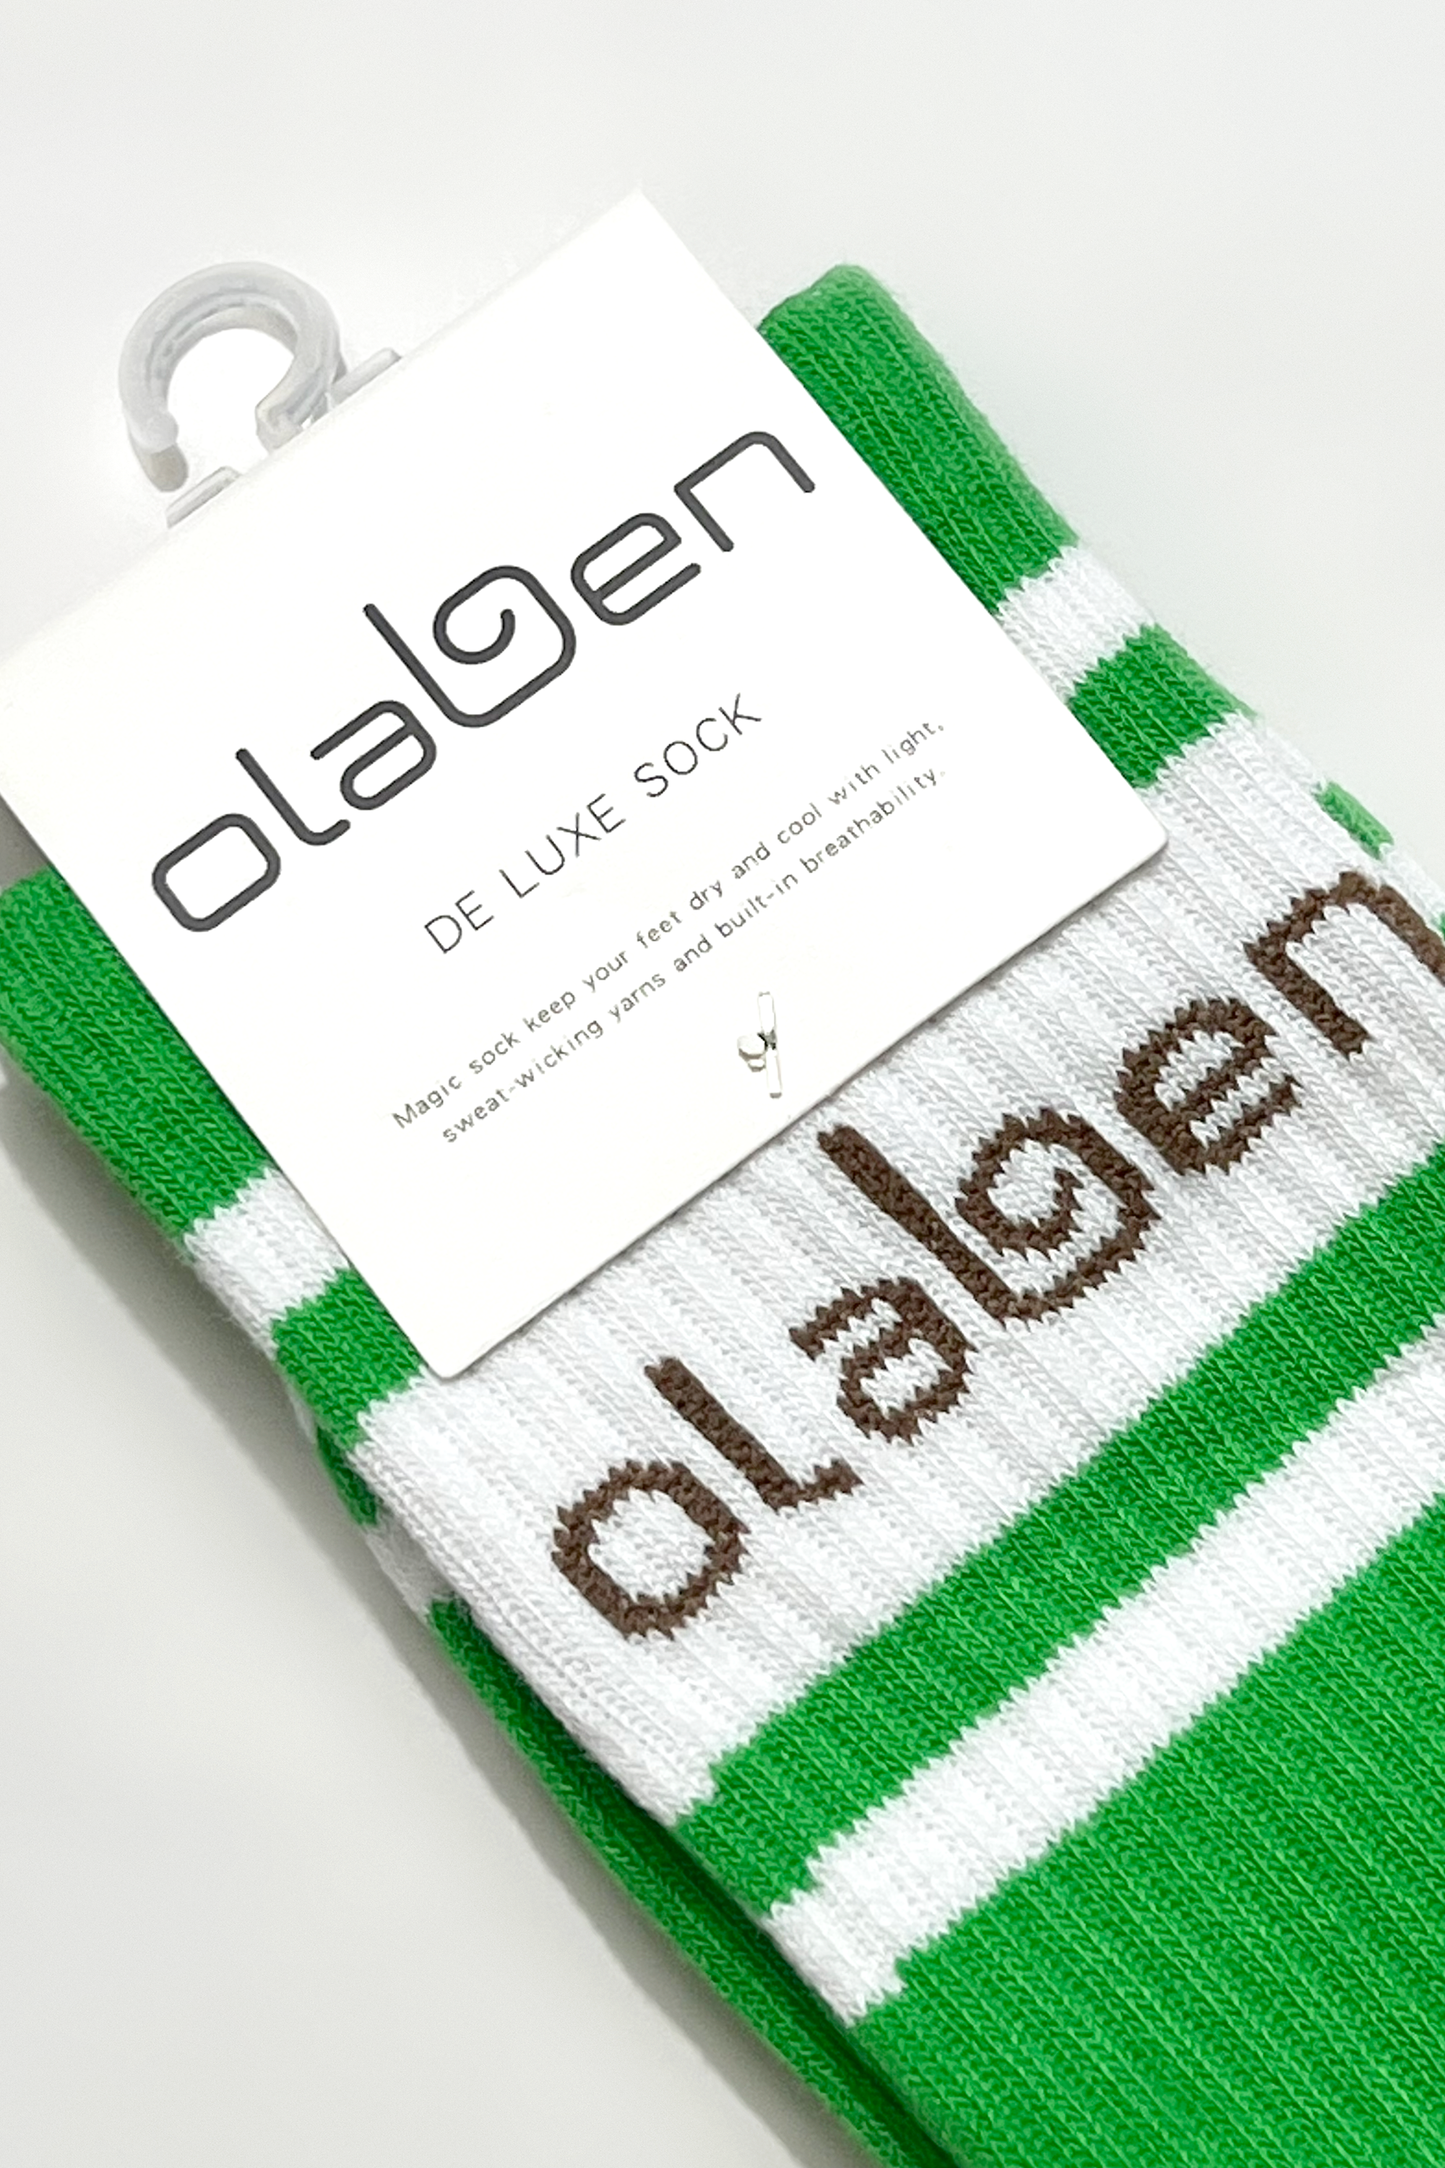 Pair of green socks with fern pattern, size 1-3, in a cozy quarter length.